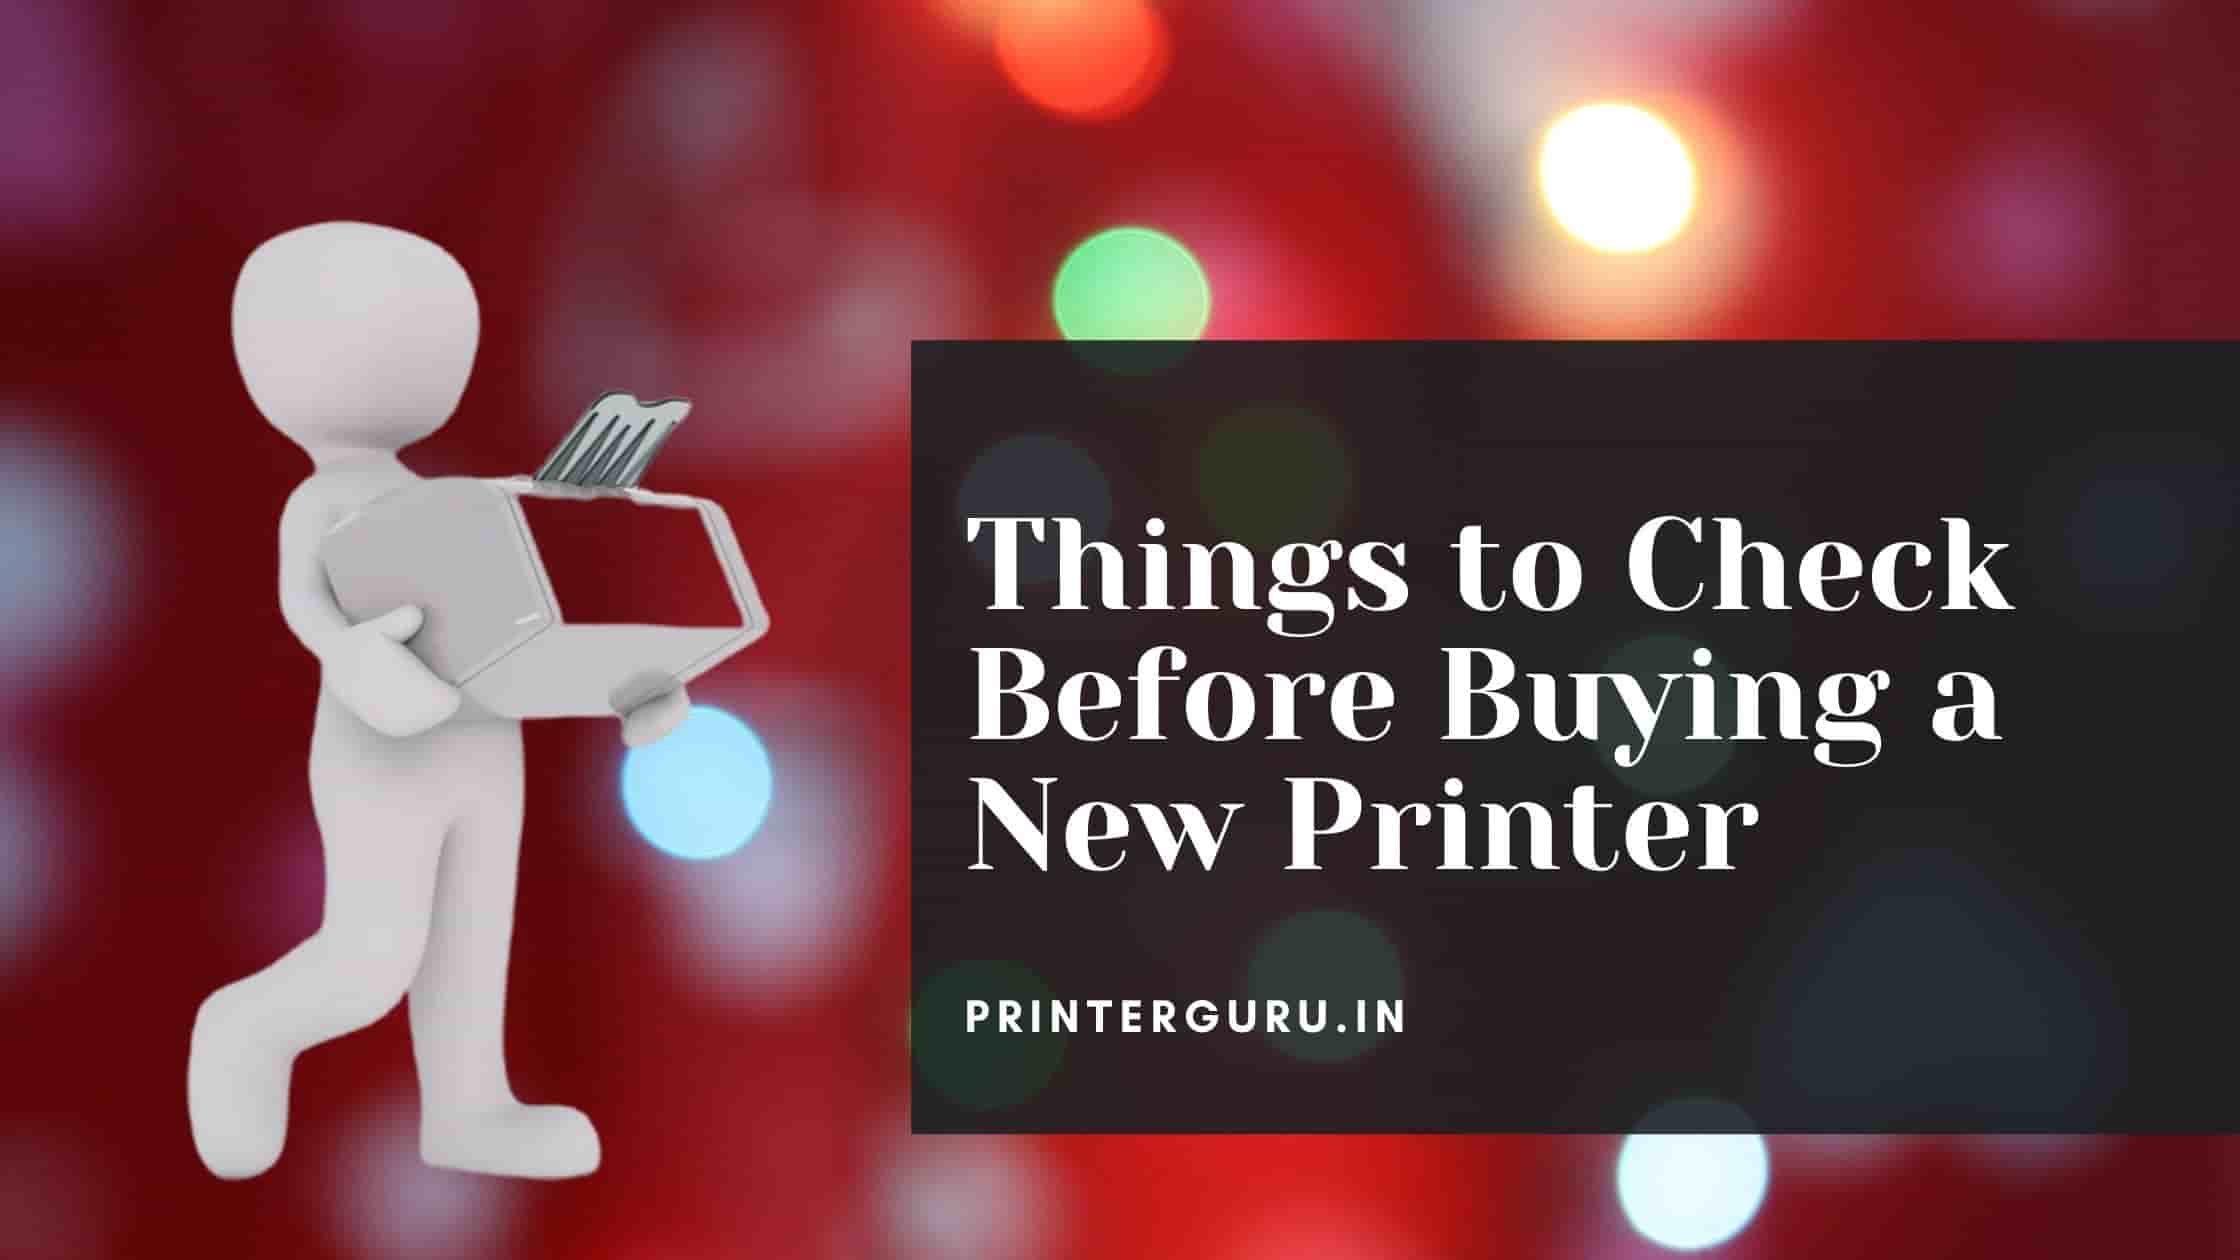 Things to Check Before Buying a New Printer